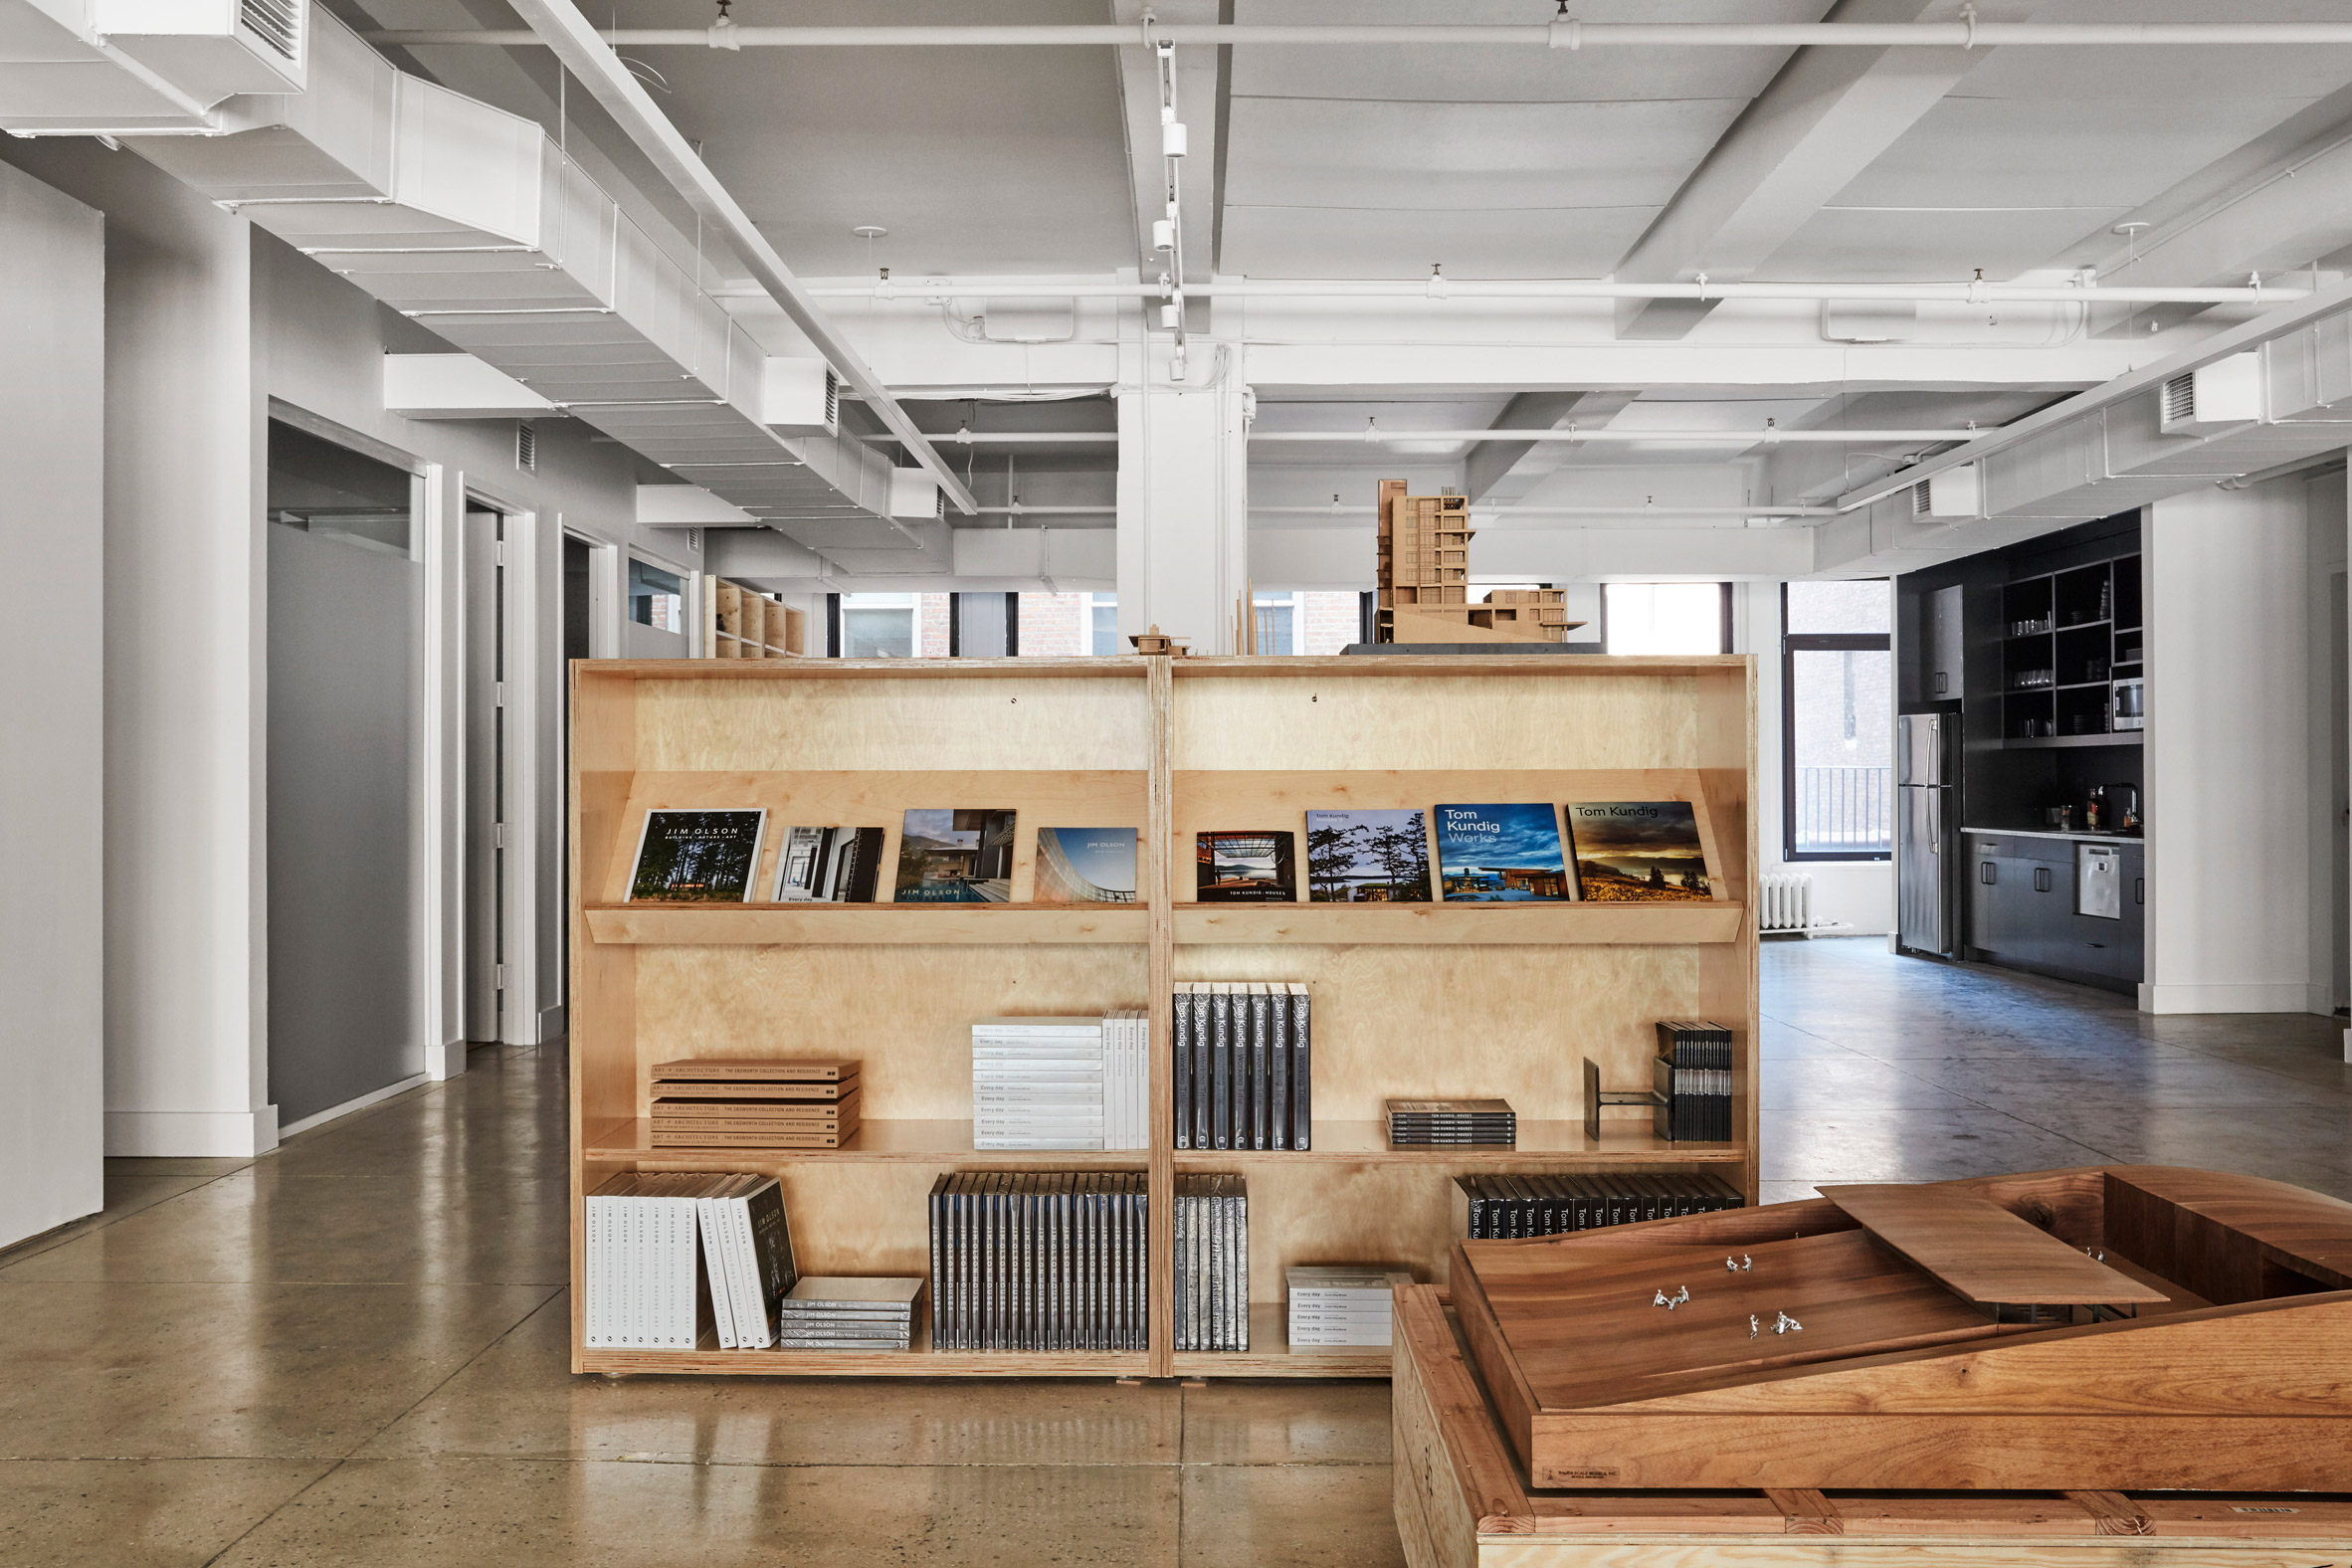 Olson Kundig designs own office interior with cityscape timber table